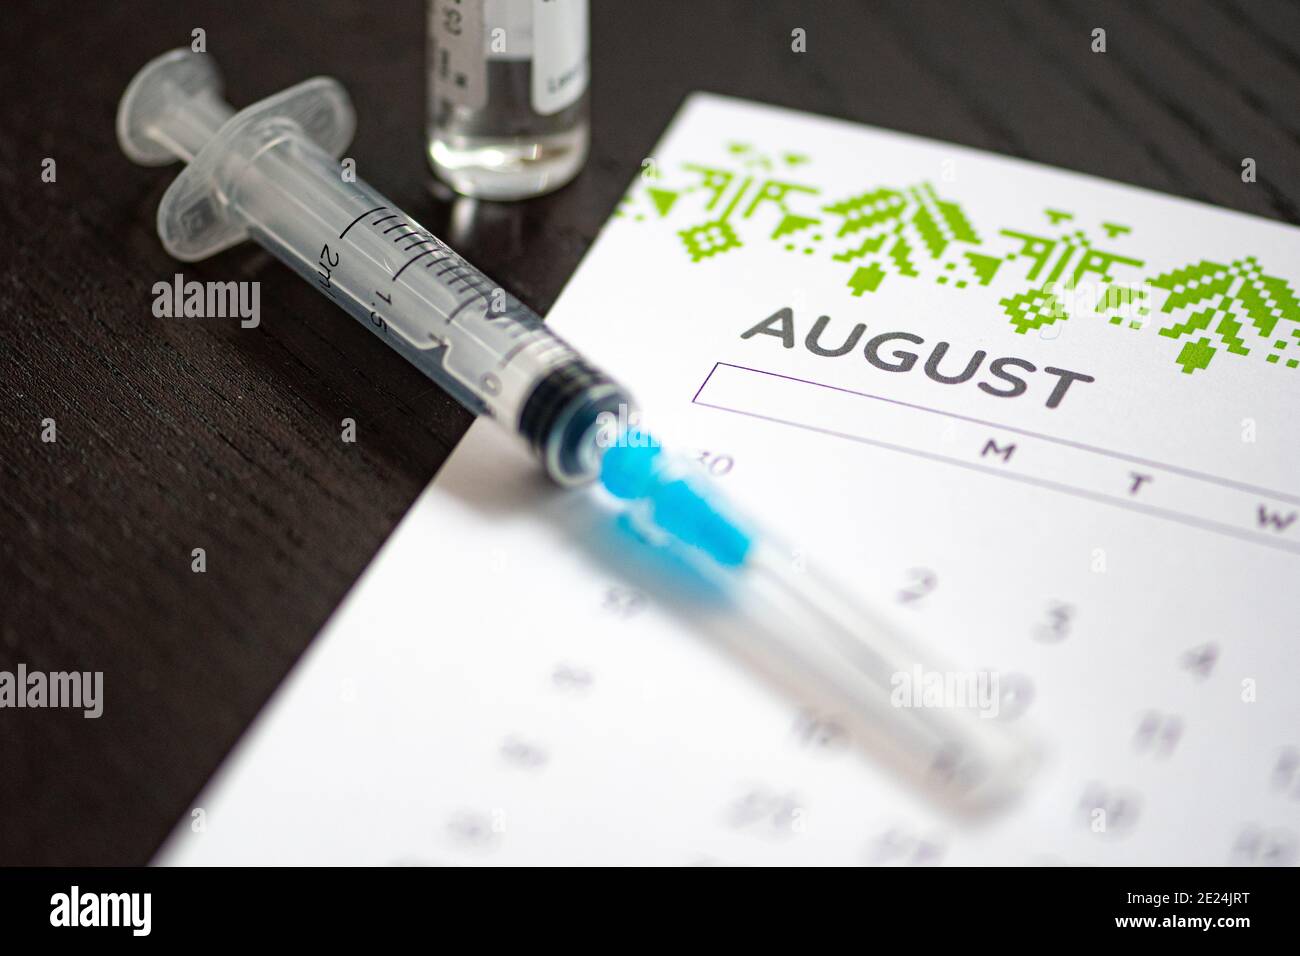 Syringe, vial and calendar with month of August on a black table ready to be used. Covid or Coronavirus vaccine background Stock Photo